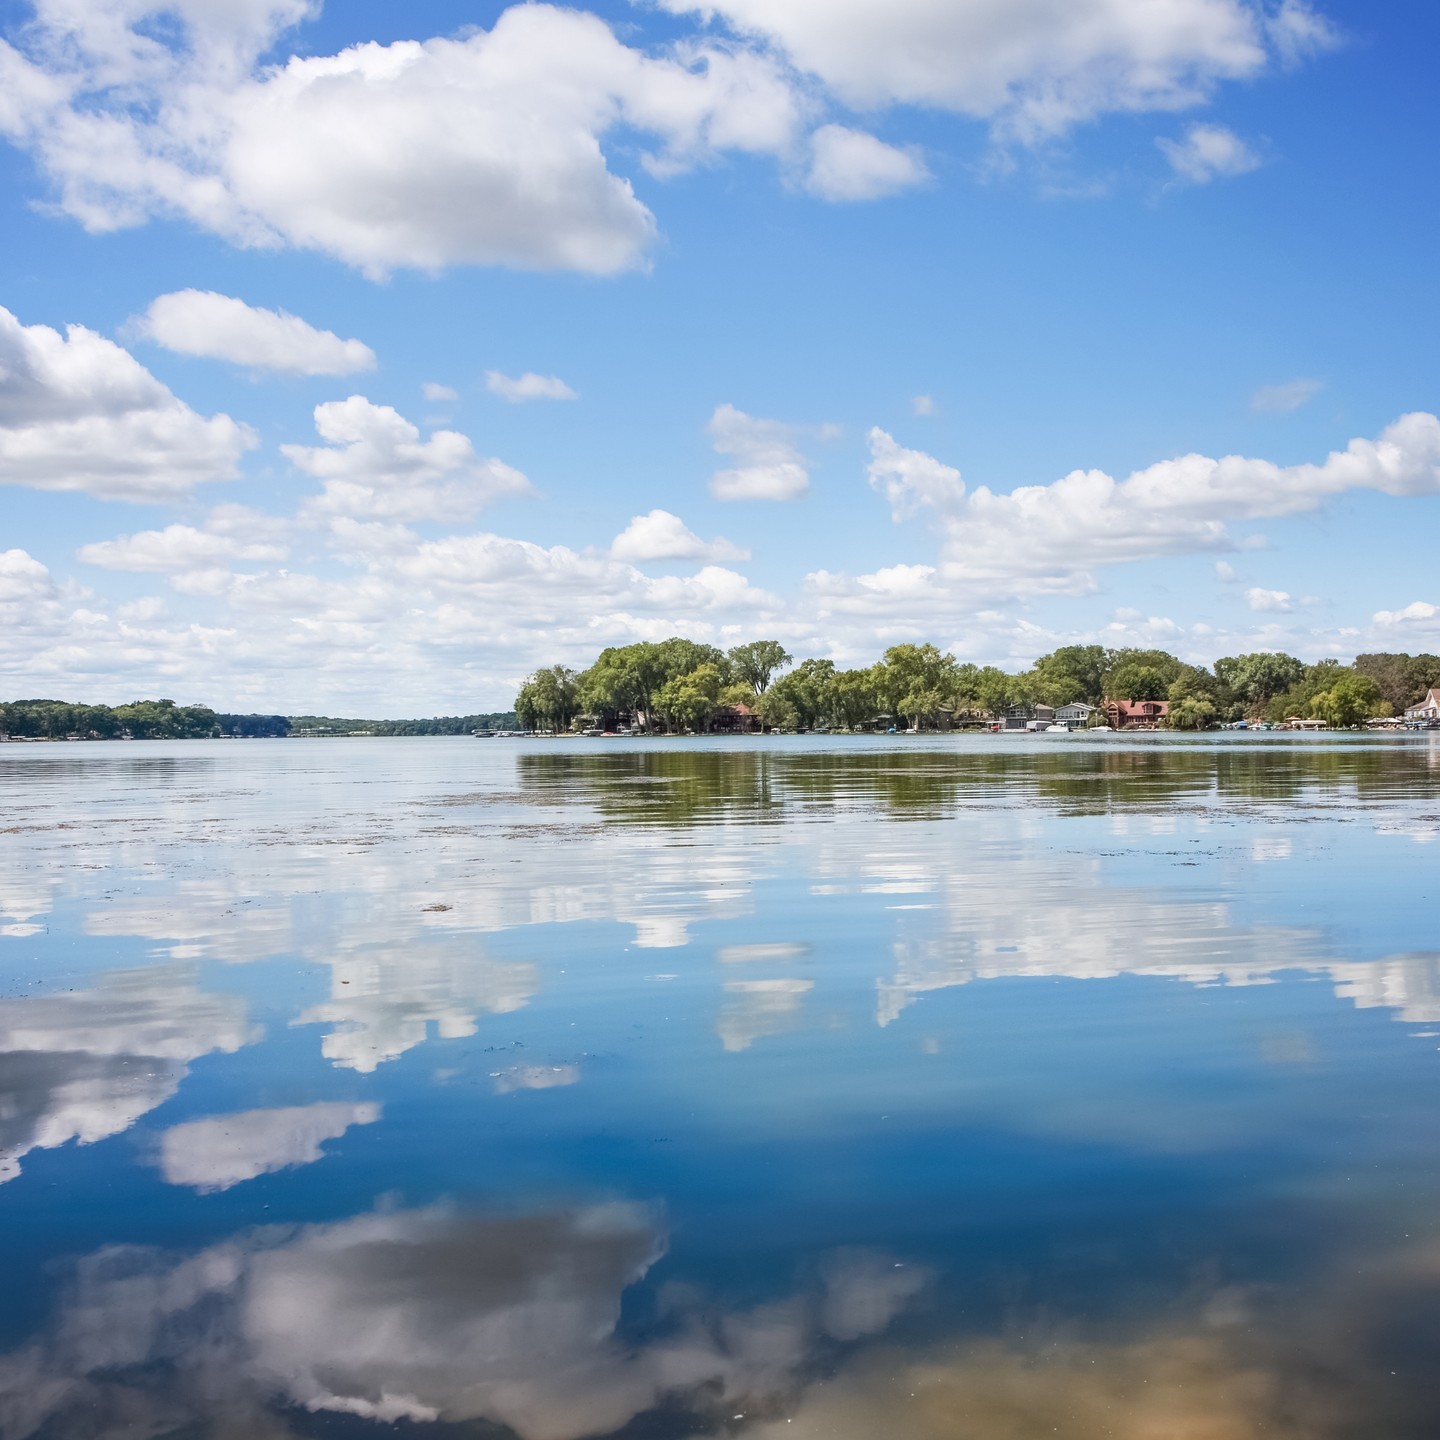 5 Locales for Boating in Wisconsin ⛵  Summer is the season to maximize time in the outdoors all around the state. And one of the best ways to soak up the sun is on the water. Whether you prefer to cruise, float or sail away the afternoon with friends, these are five idyllic locales for boating in Wisconsin. Check out the list at FabulousWisconsin.com.